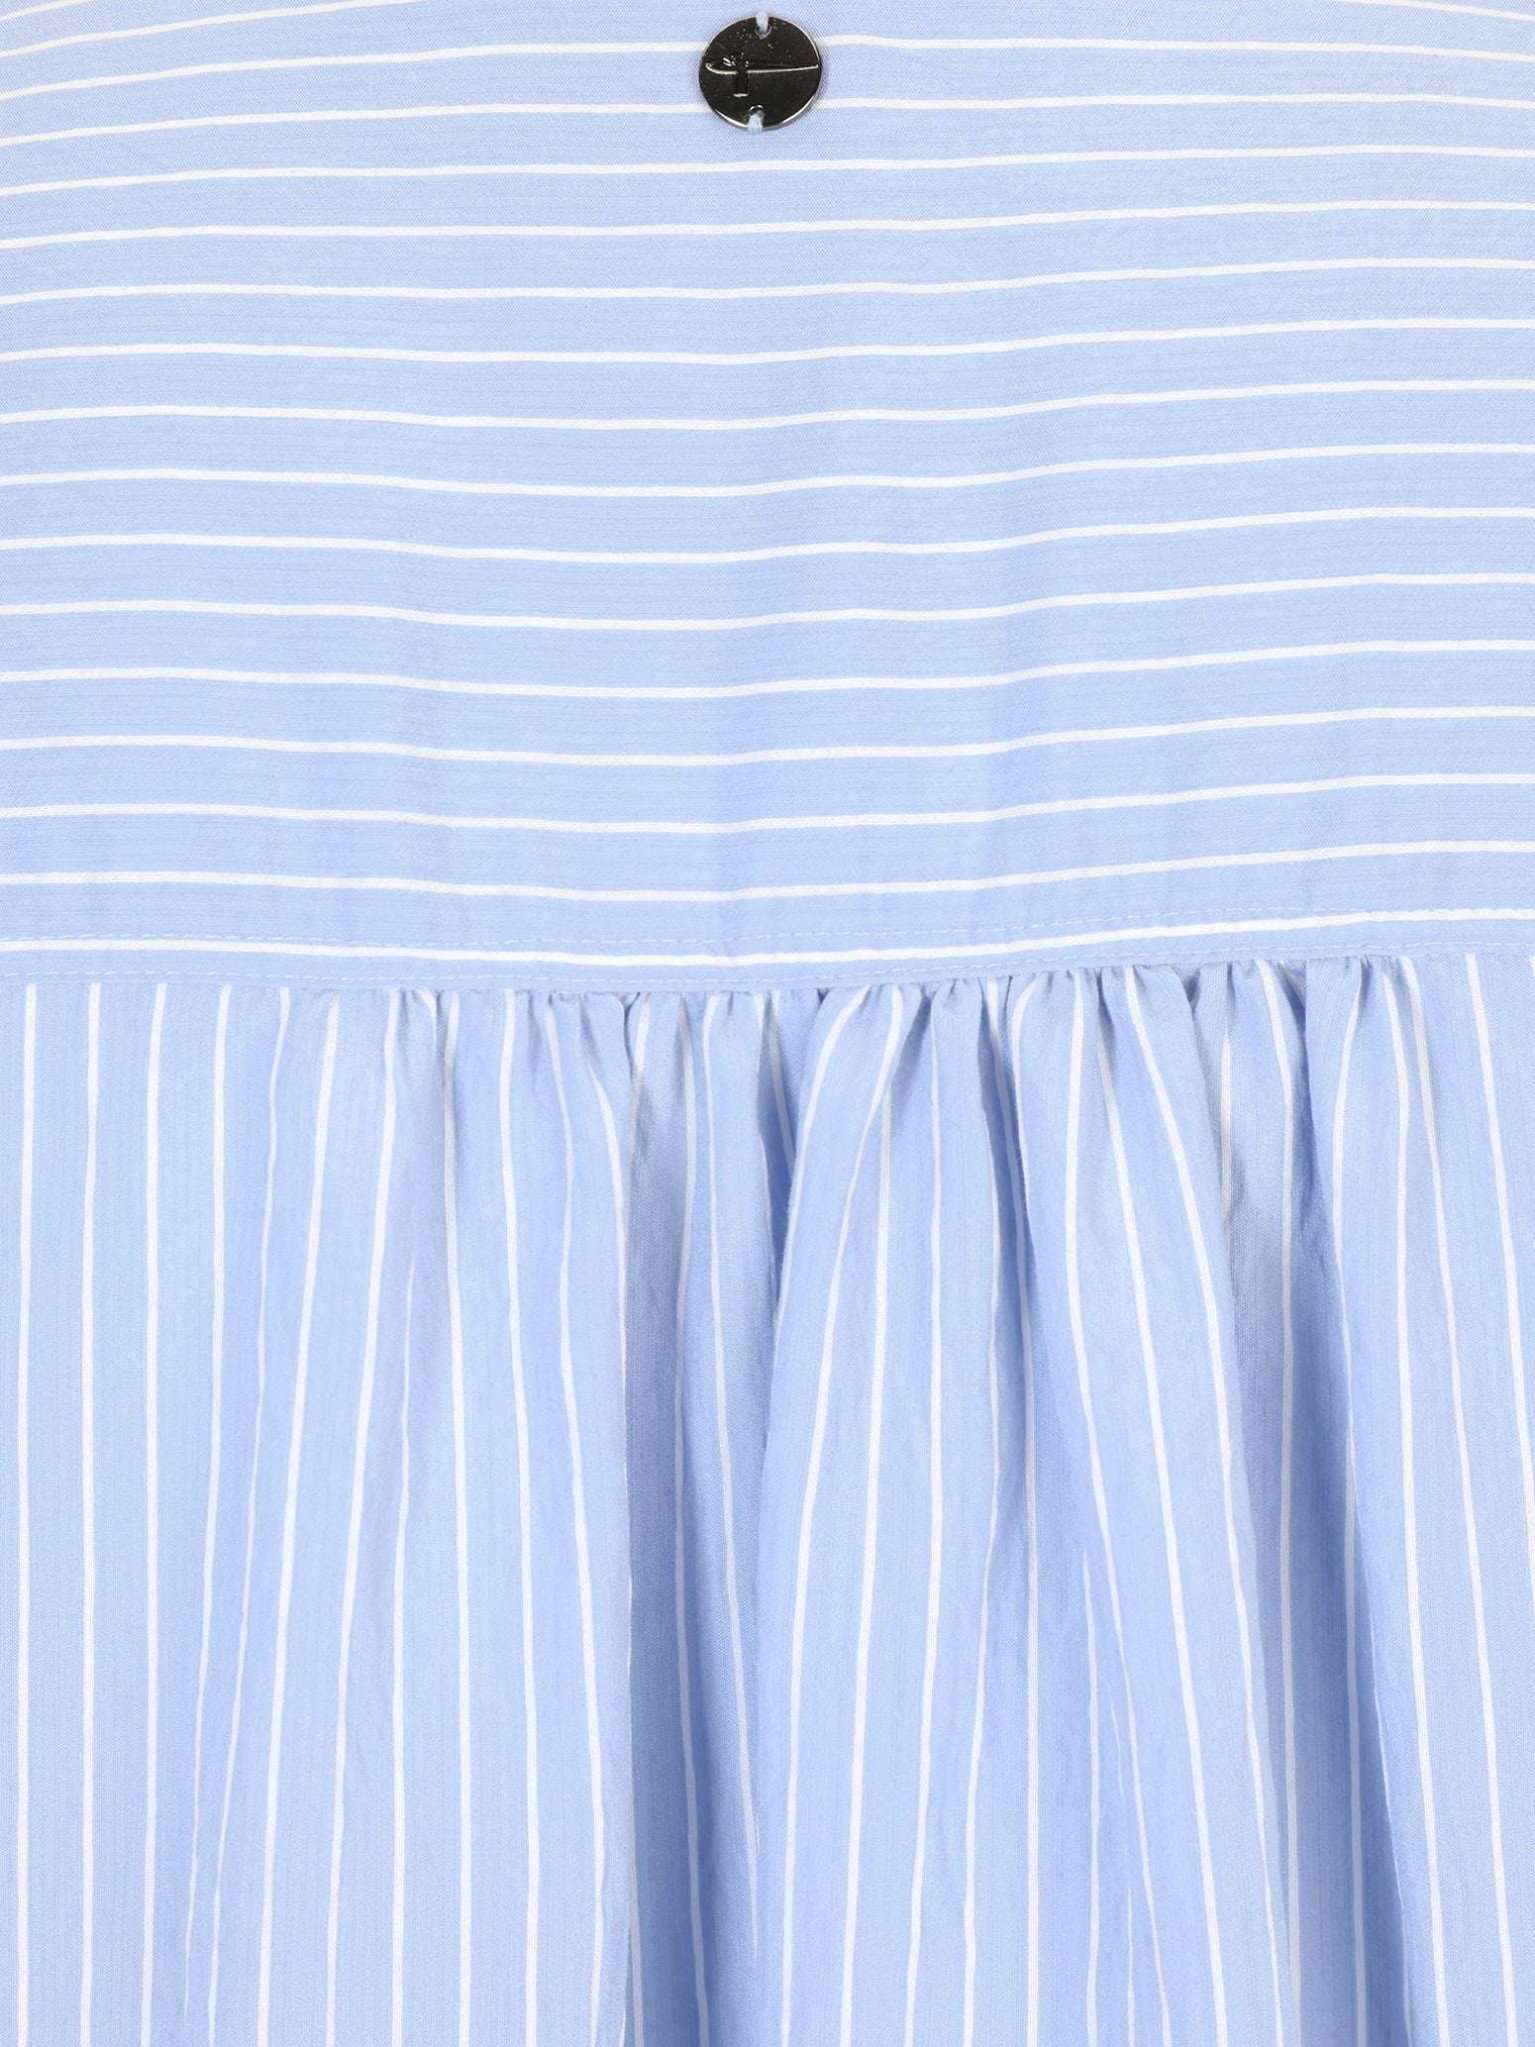 Amantea Short Sleeve  Blouse With Pockets in Arctic Ice/Bright White Striped Hemden Tamaris   